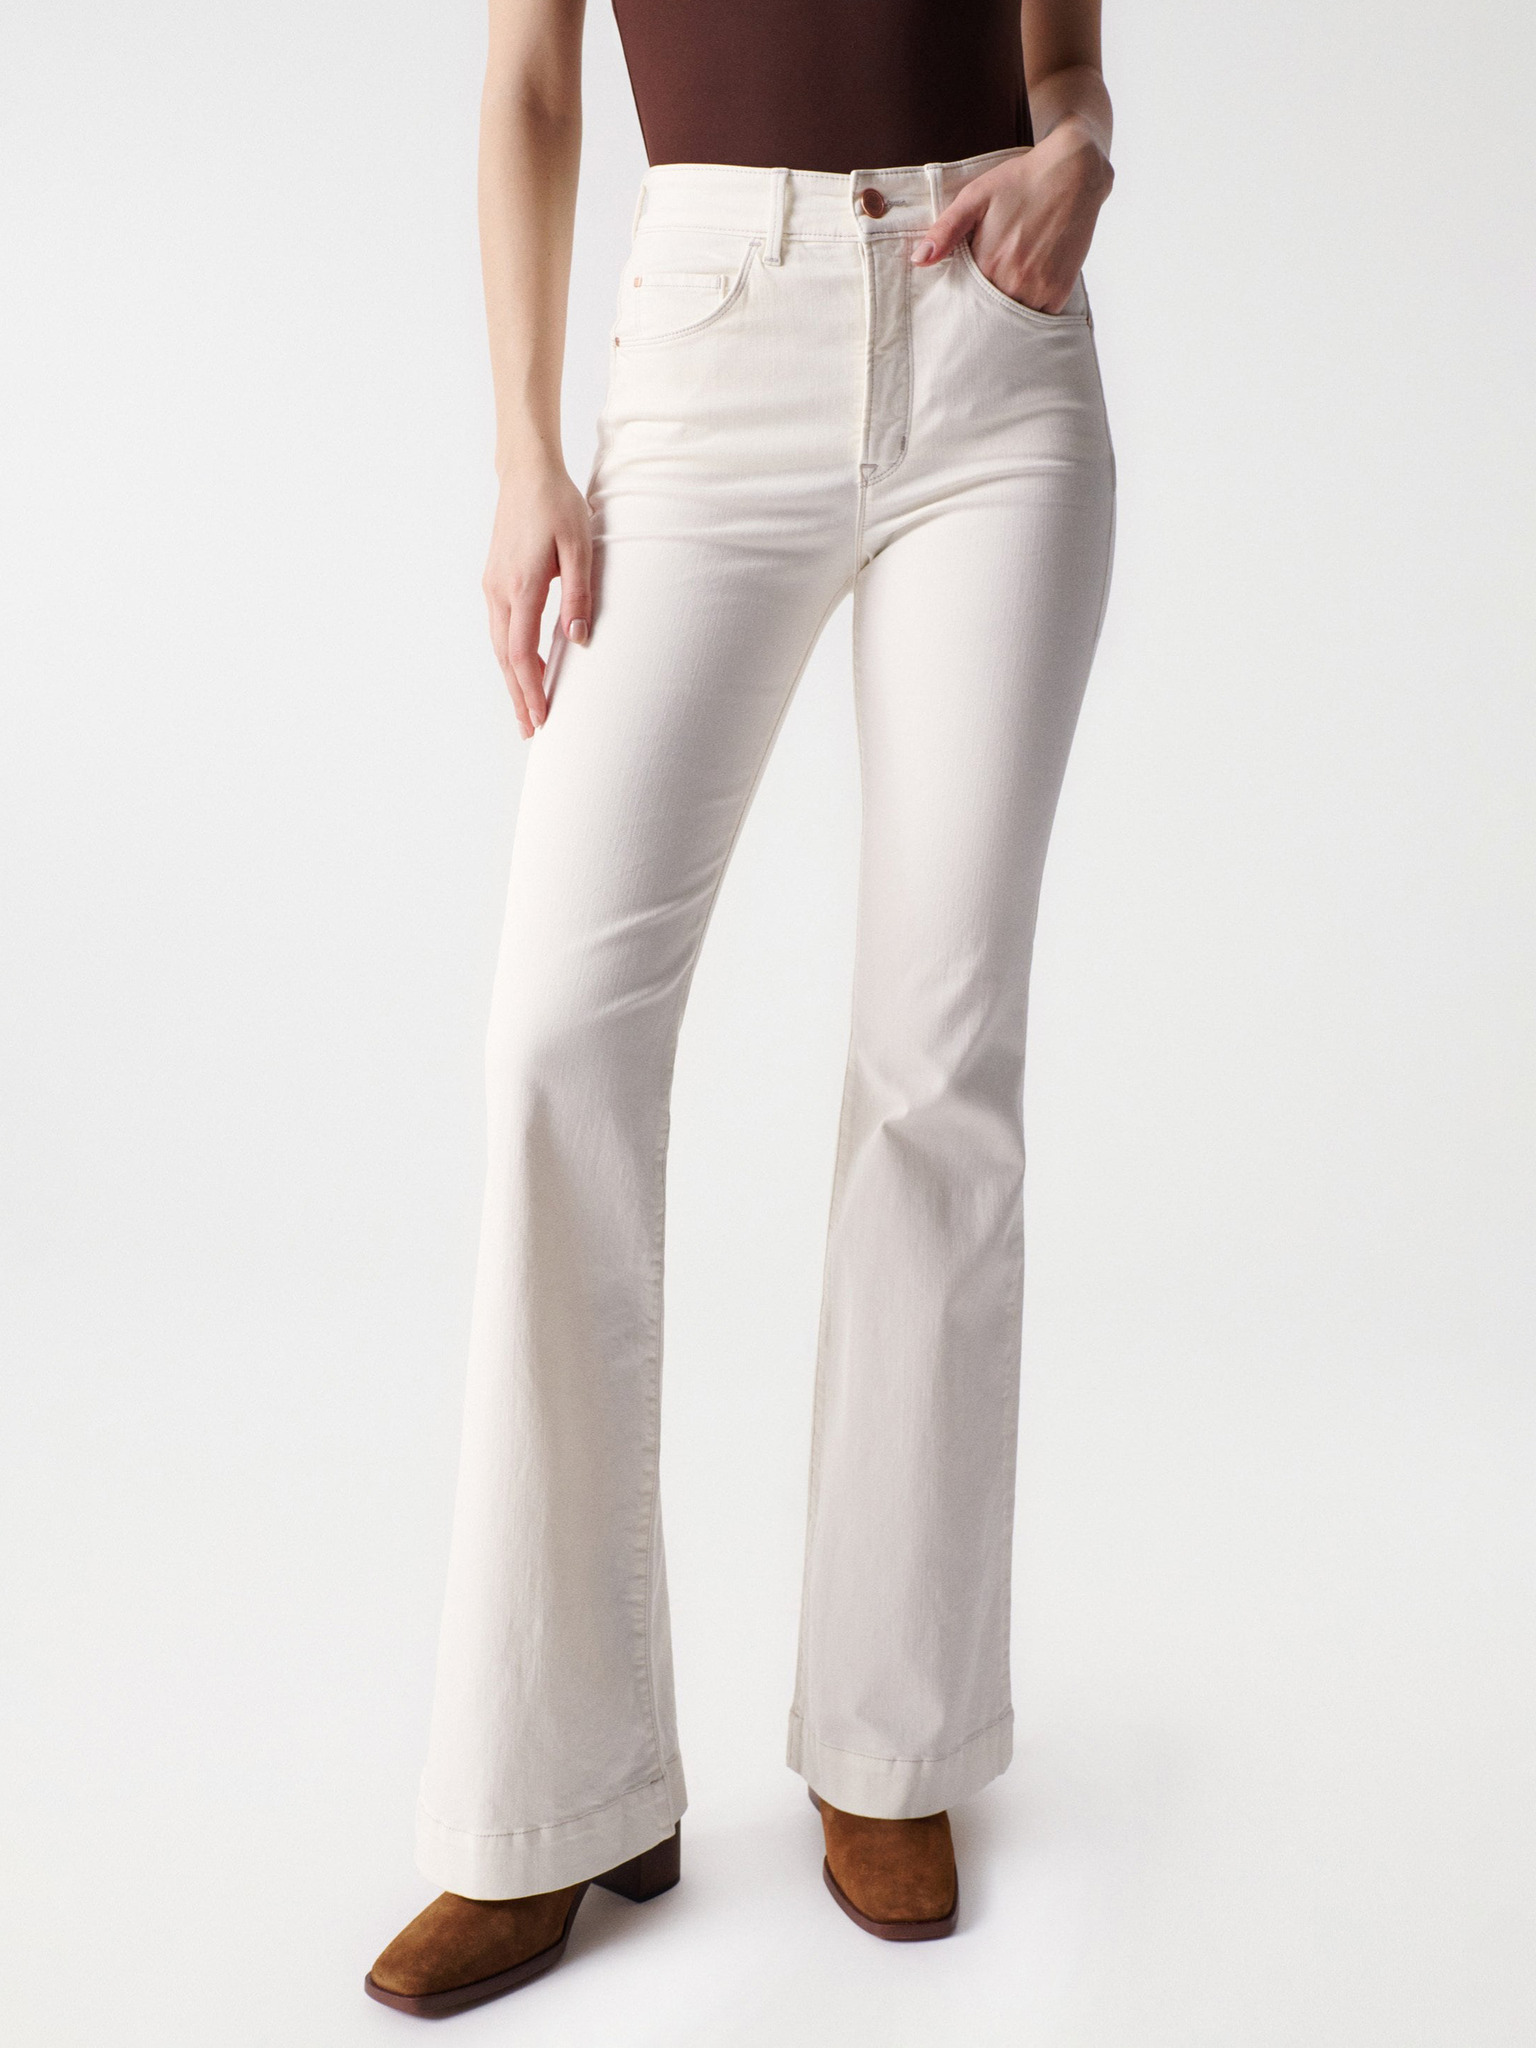 Glamour Jeans Salsa Jeans